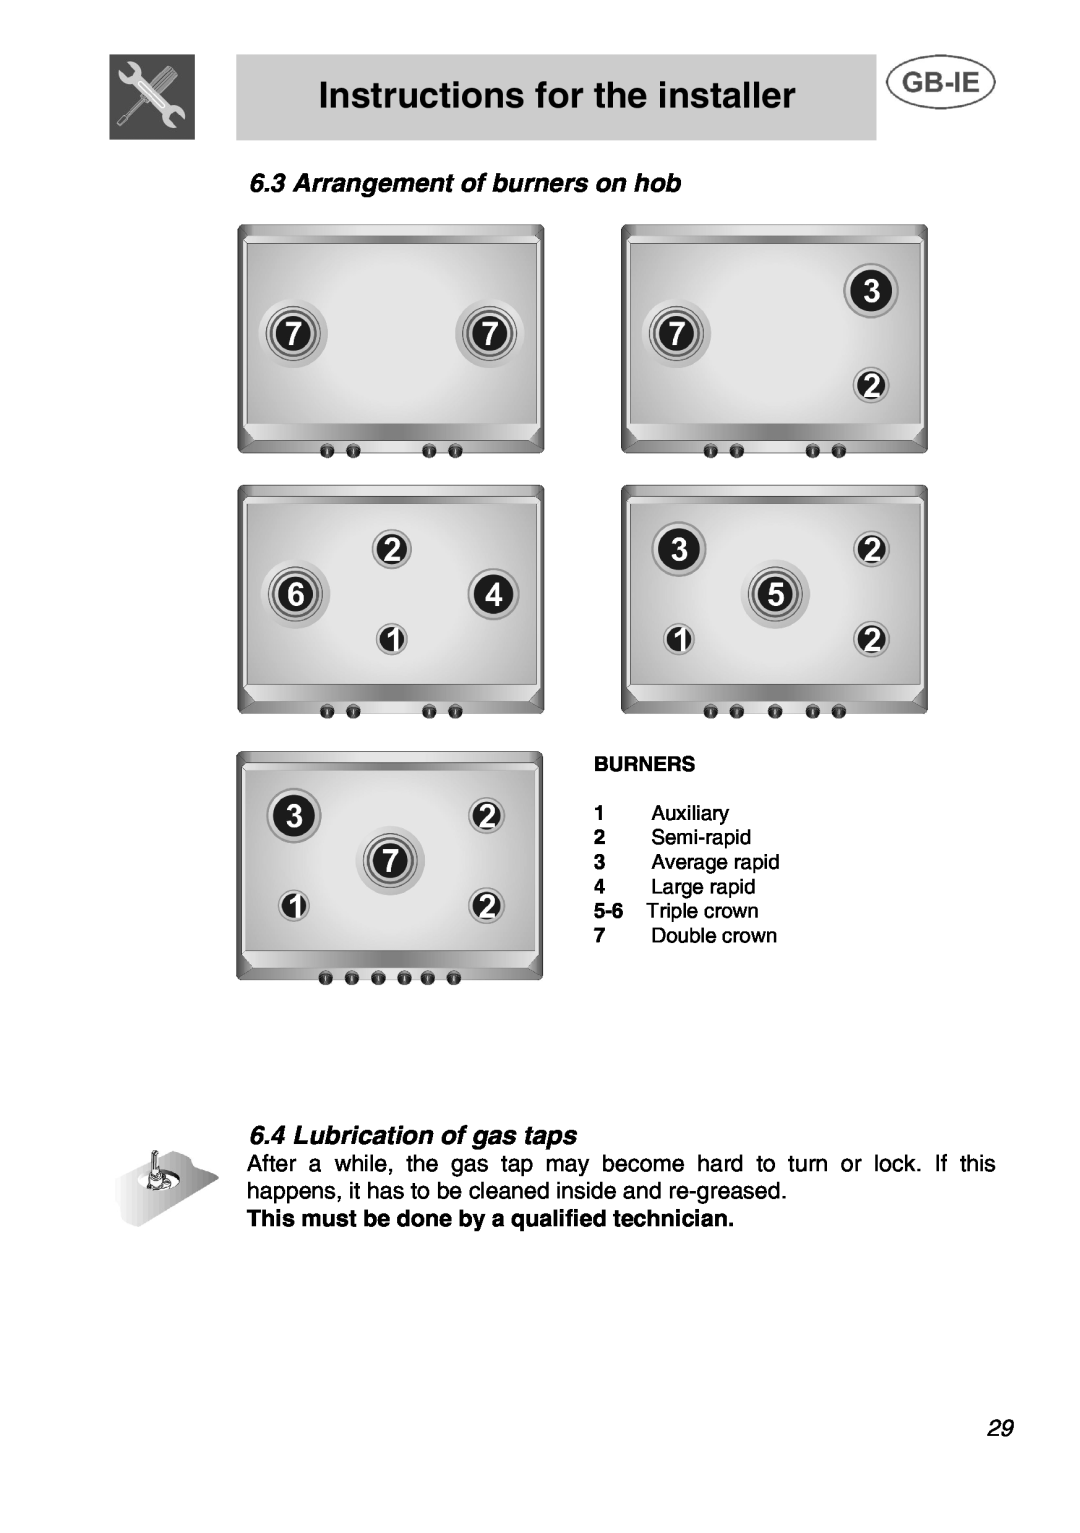 Smeg T2740N1NL manual Arrangement of burners on hob, Lubrication of gas taps, Instructions for the installer, Burners 